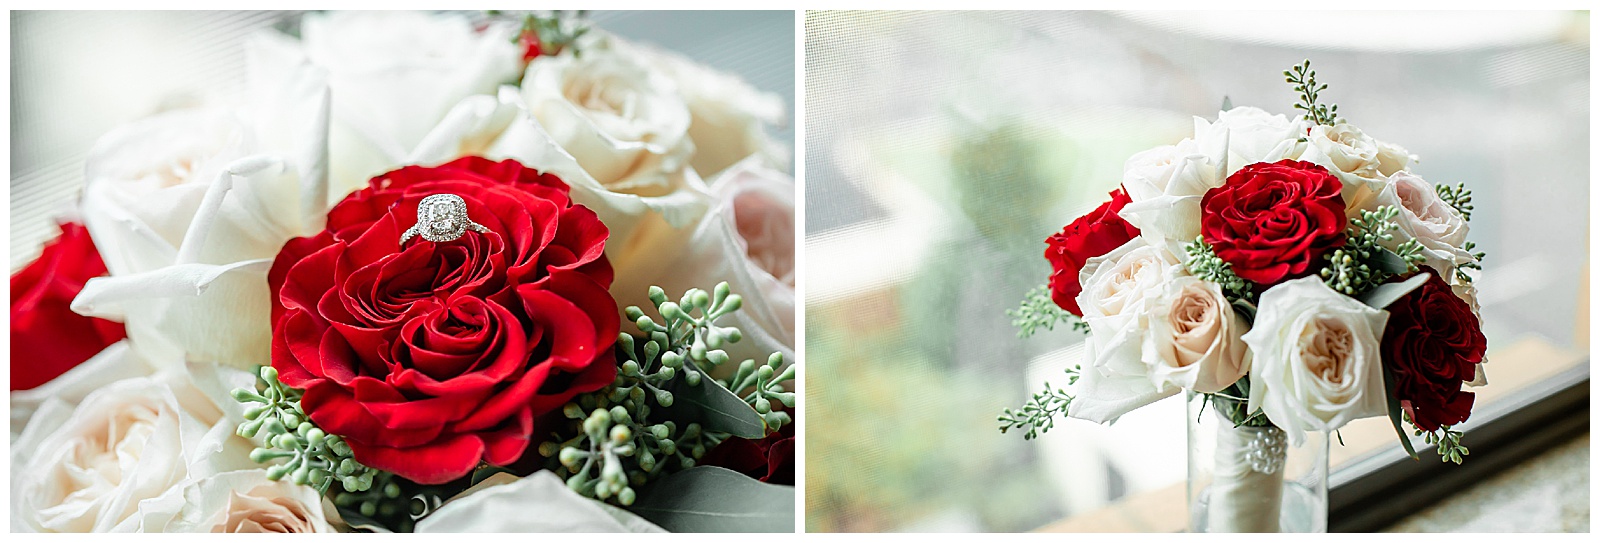 bouquet with red and white roses